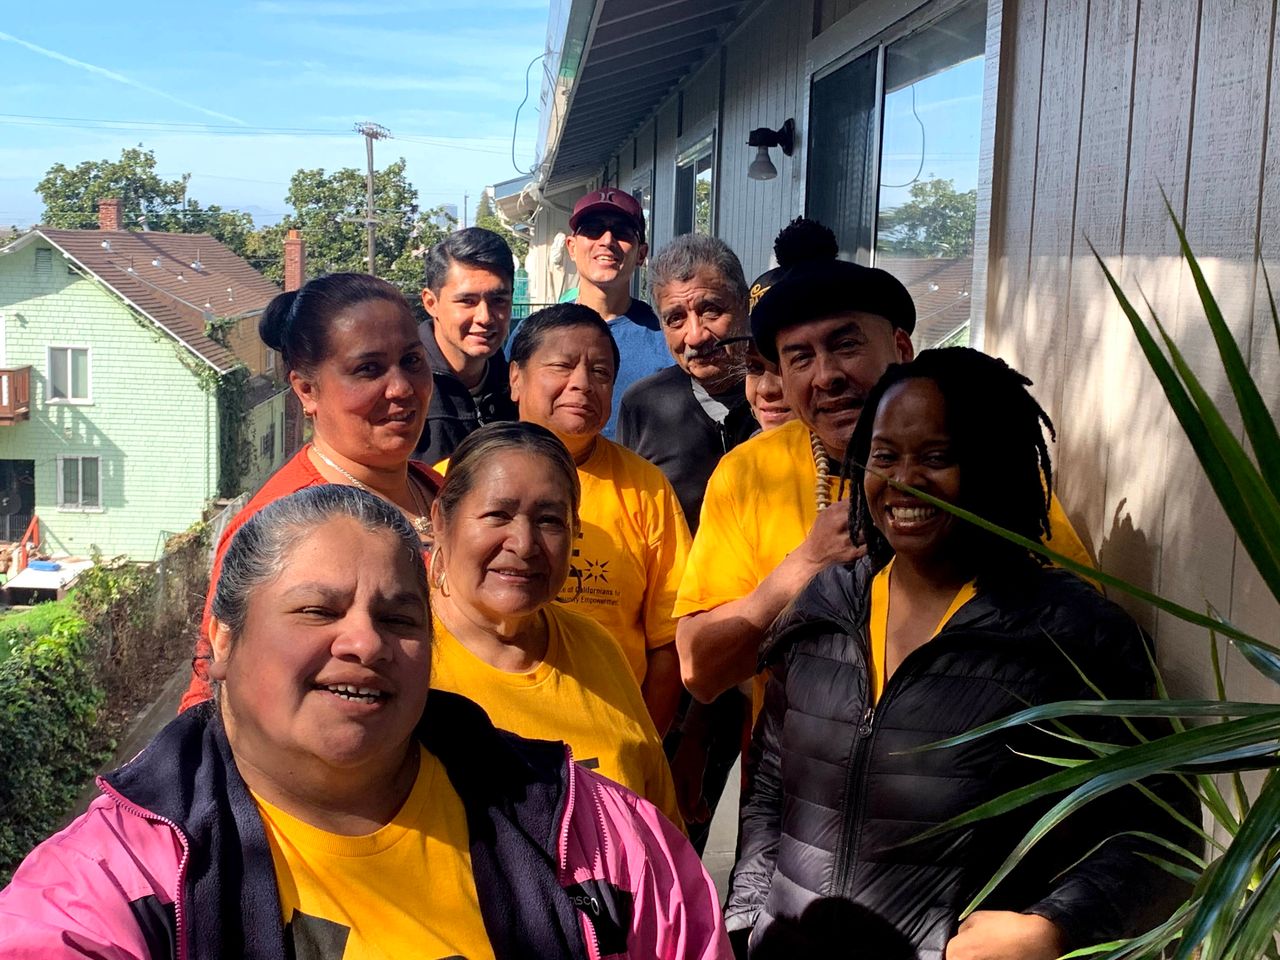 Perez with some of his fellow rent strikers and ACCE staff including Israel Lepiz (pictured back, left) and ACCE Oakland director Carroll Fife (pictured front, right).